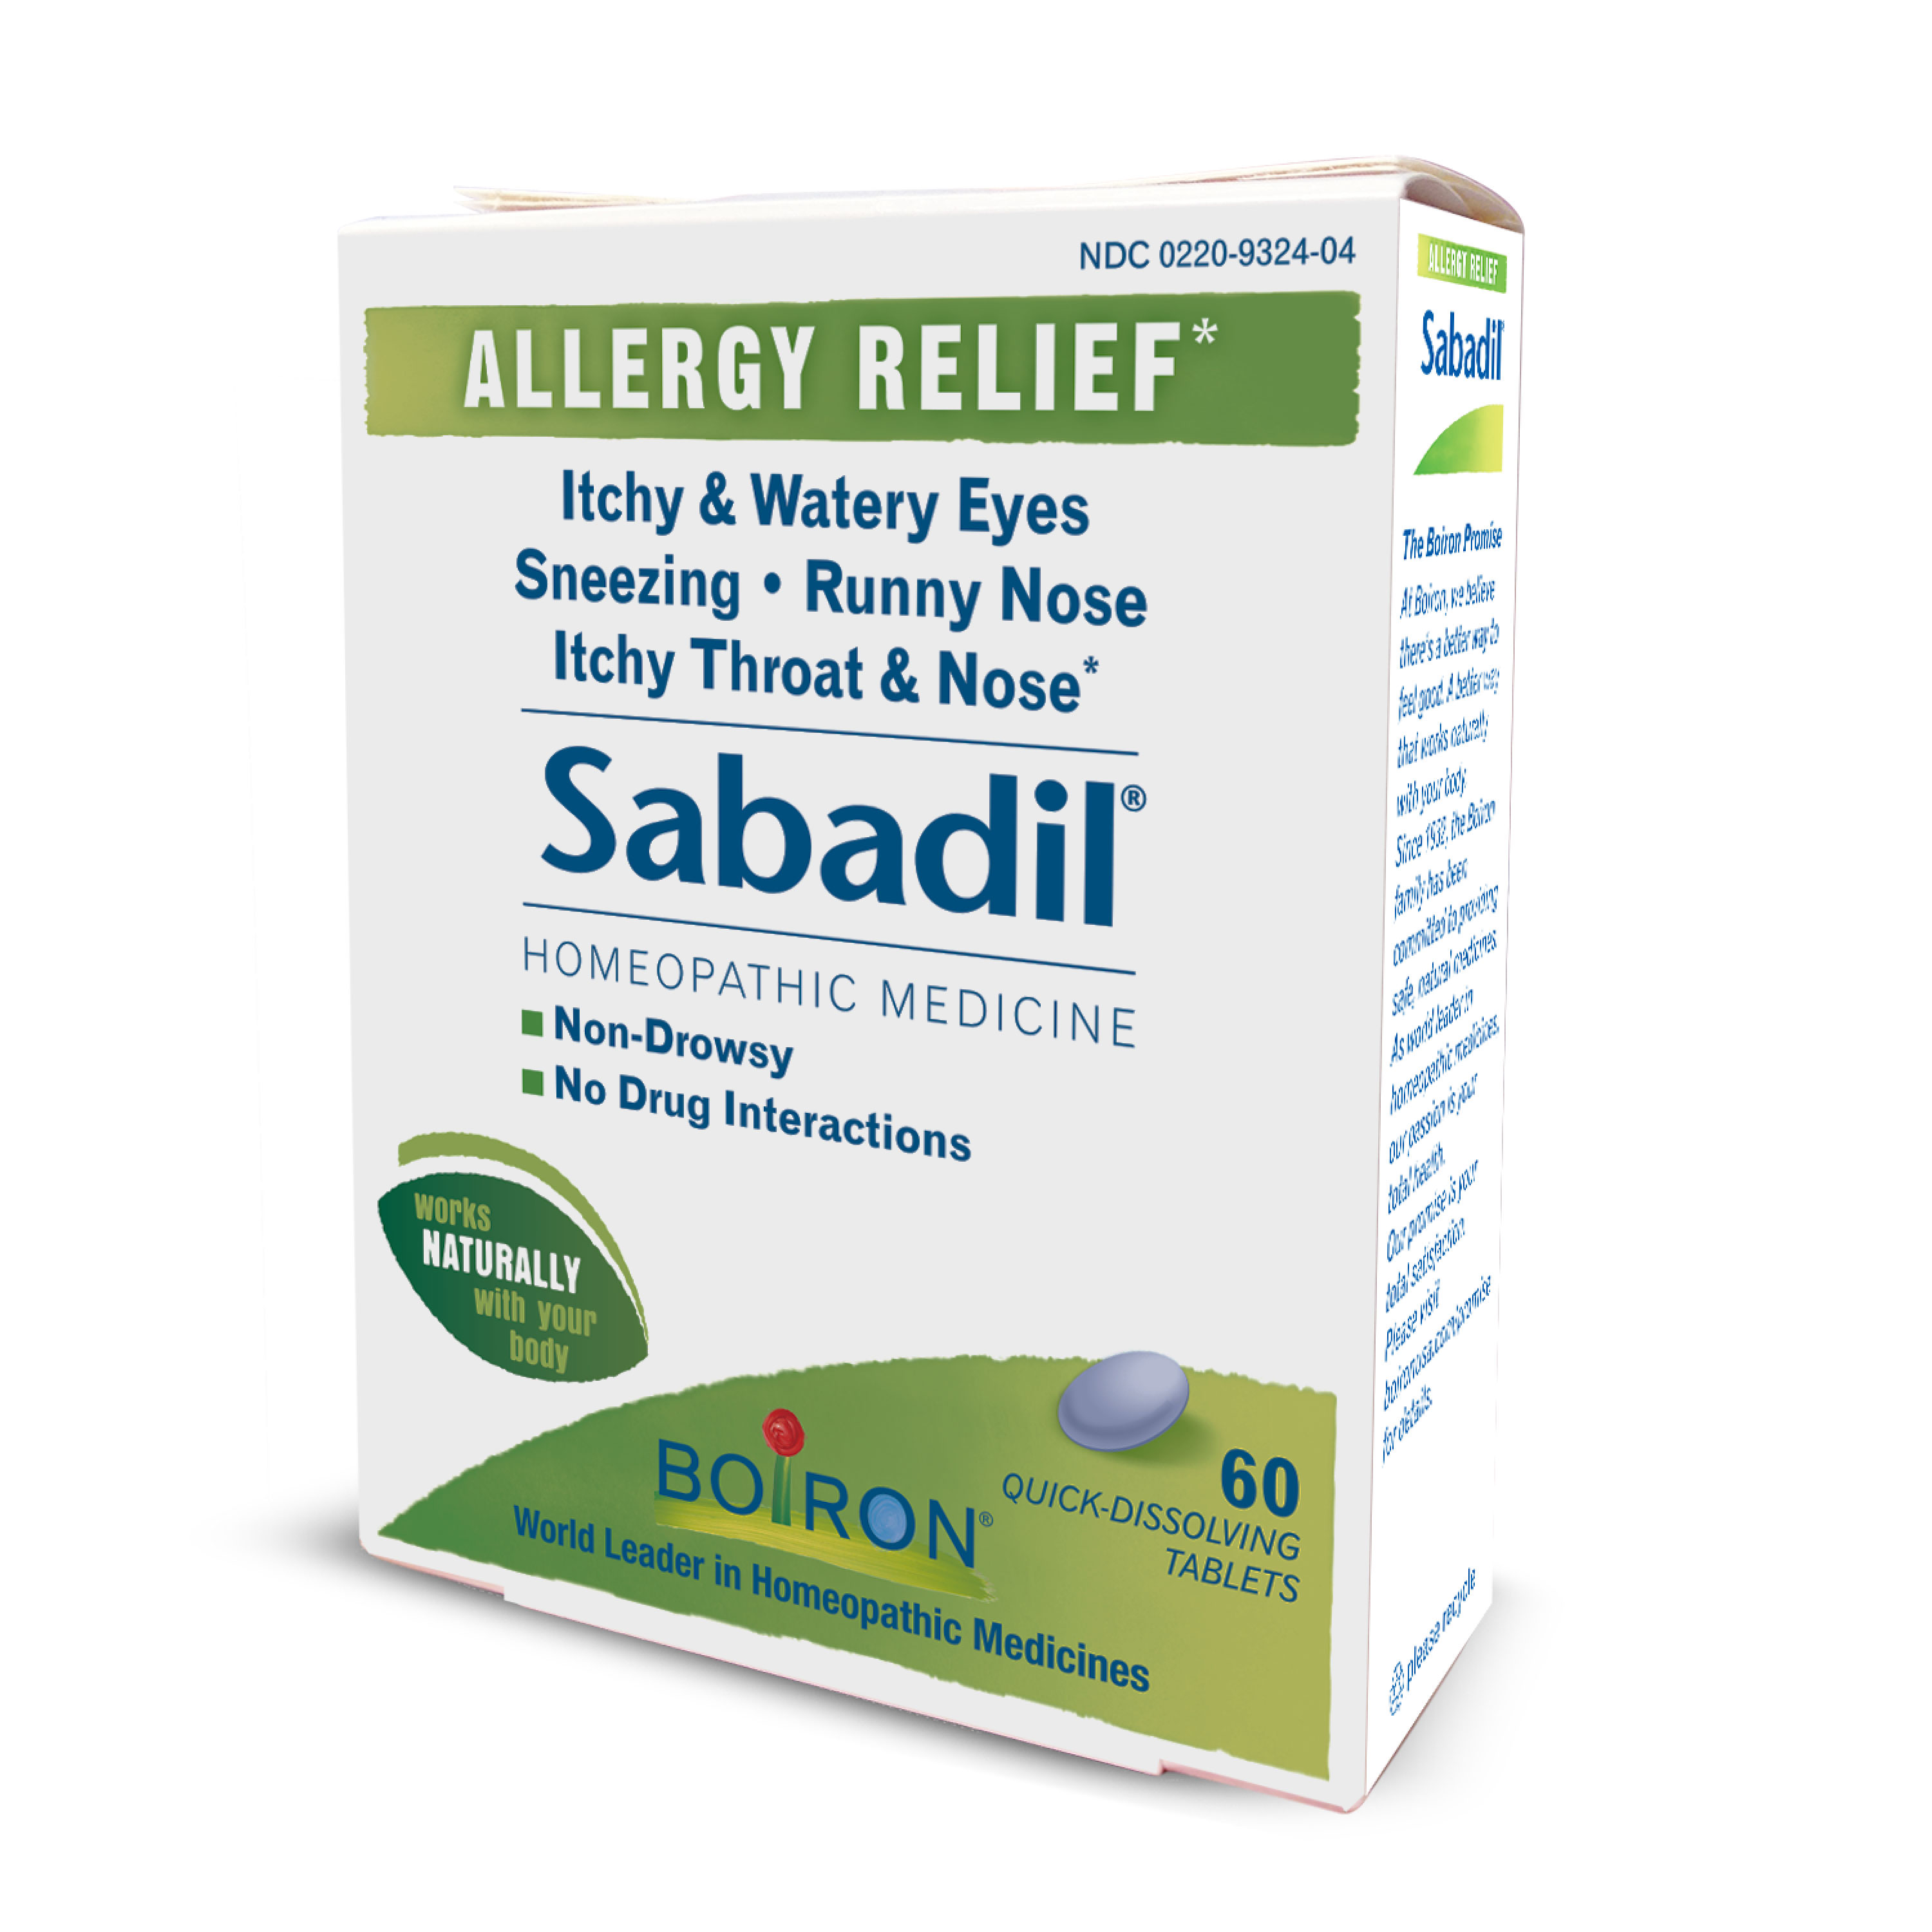 Boiron Sabadil Allergy Relief Tablets, 60 Ct - image 3 of 3